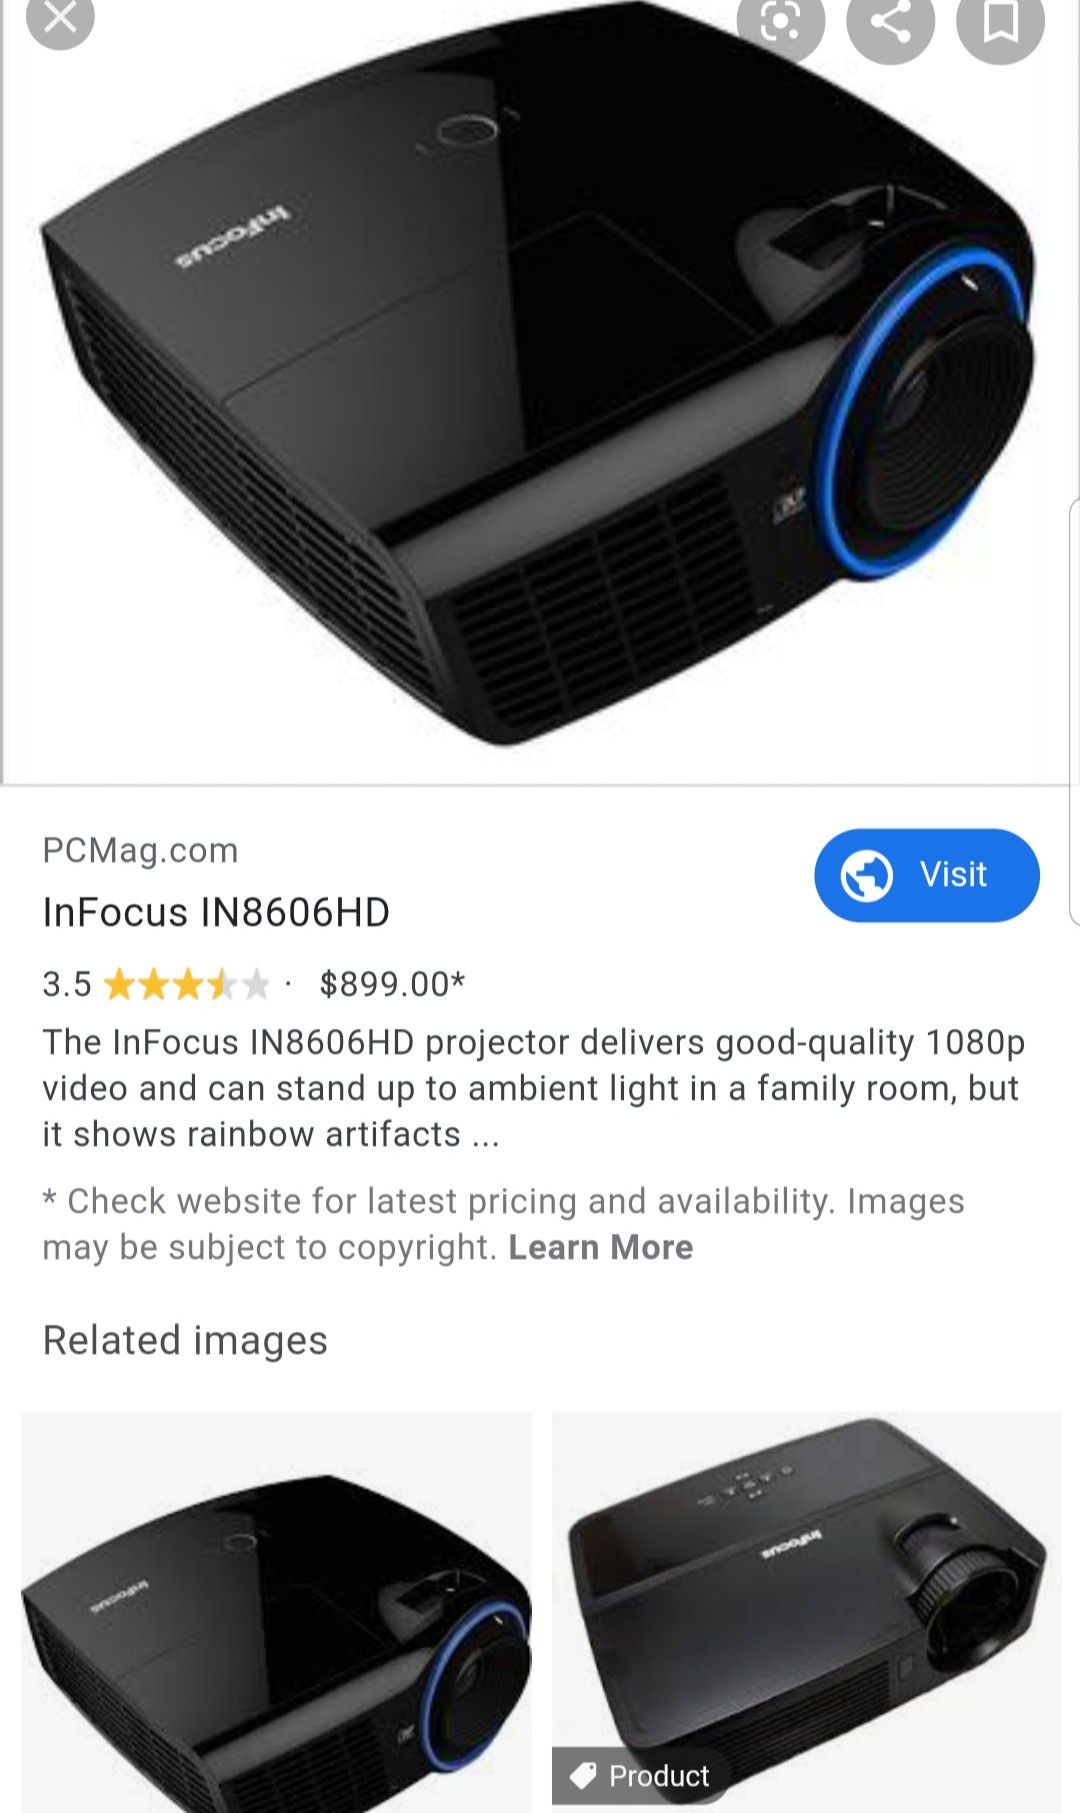 InFocus IN8606HD Home Theater Projection Machine